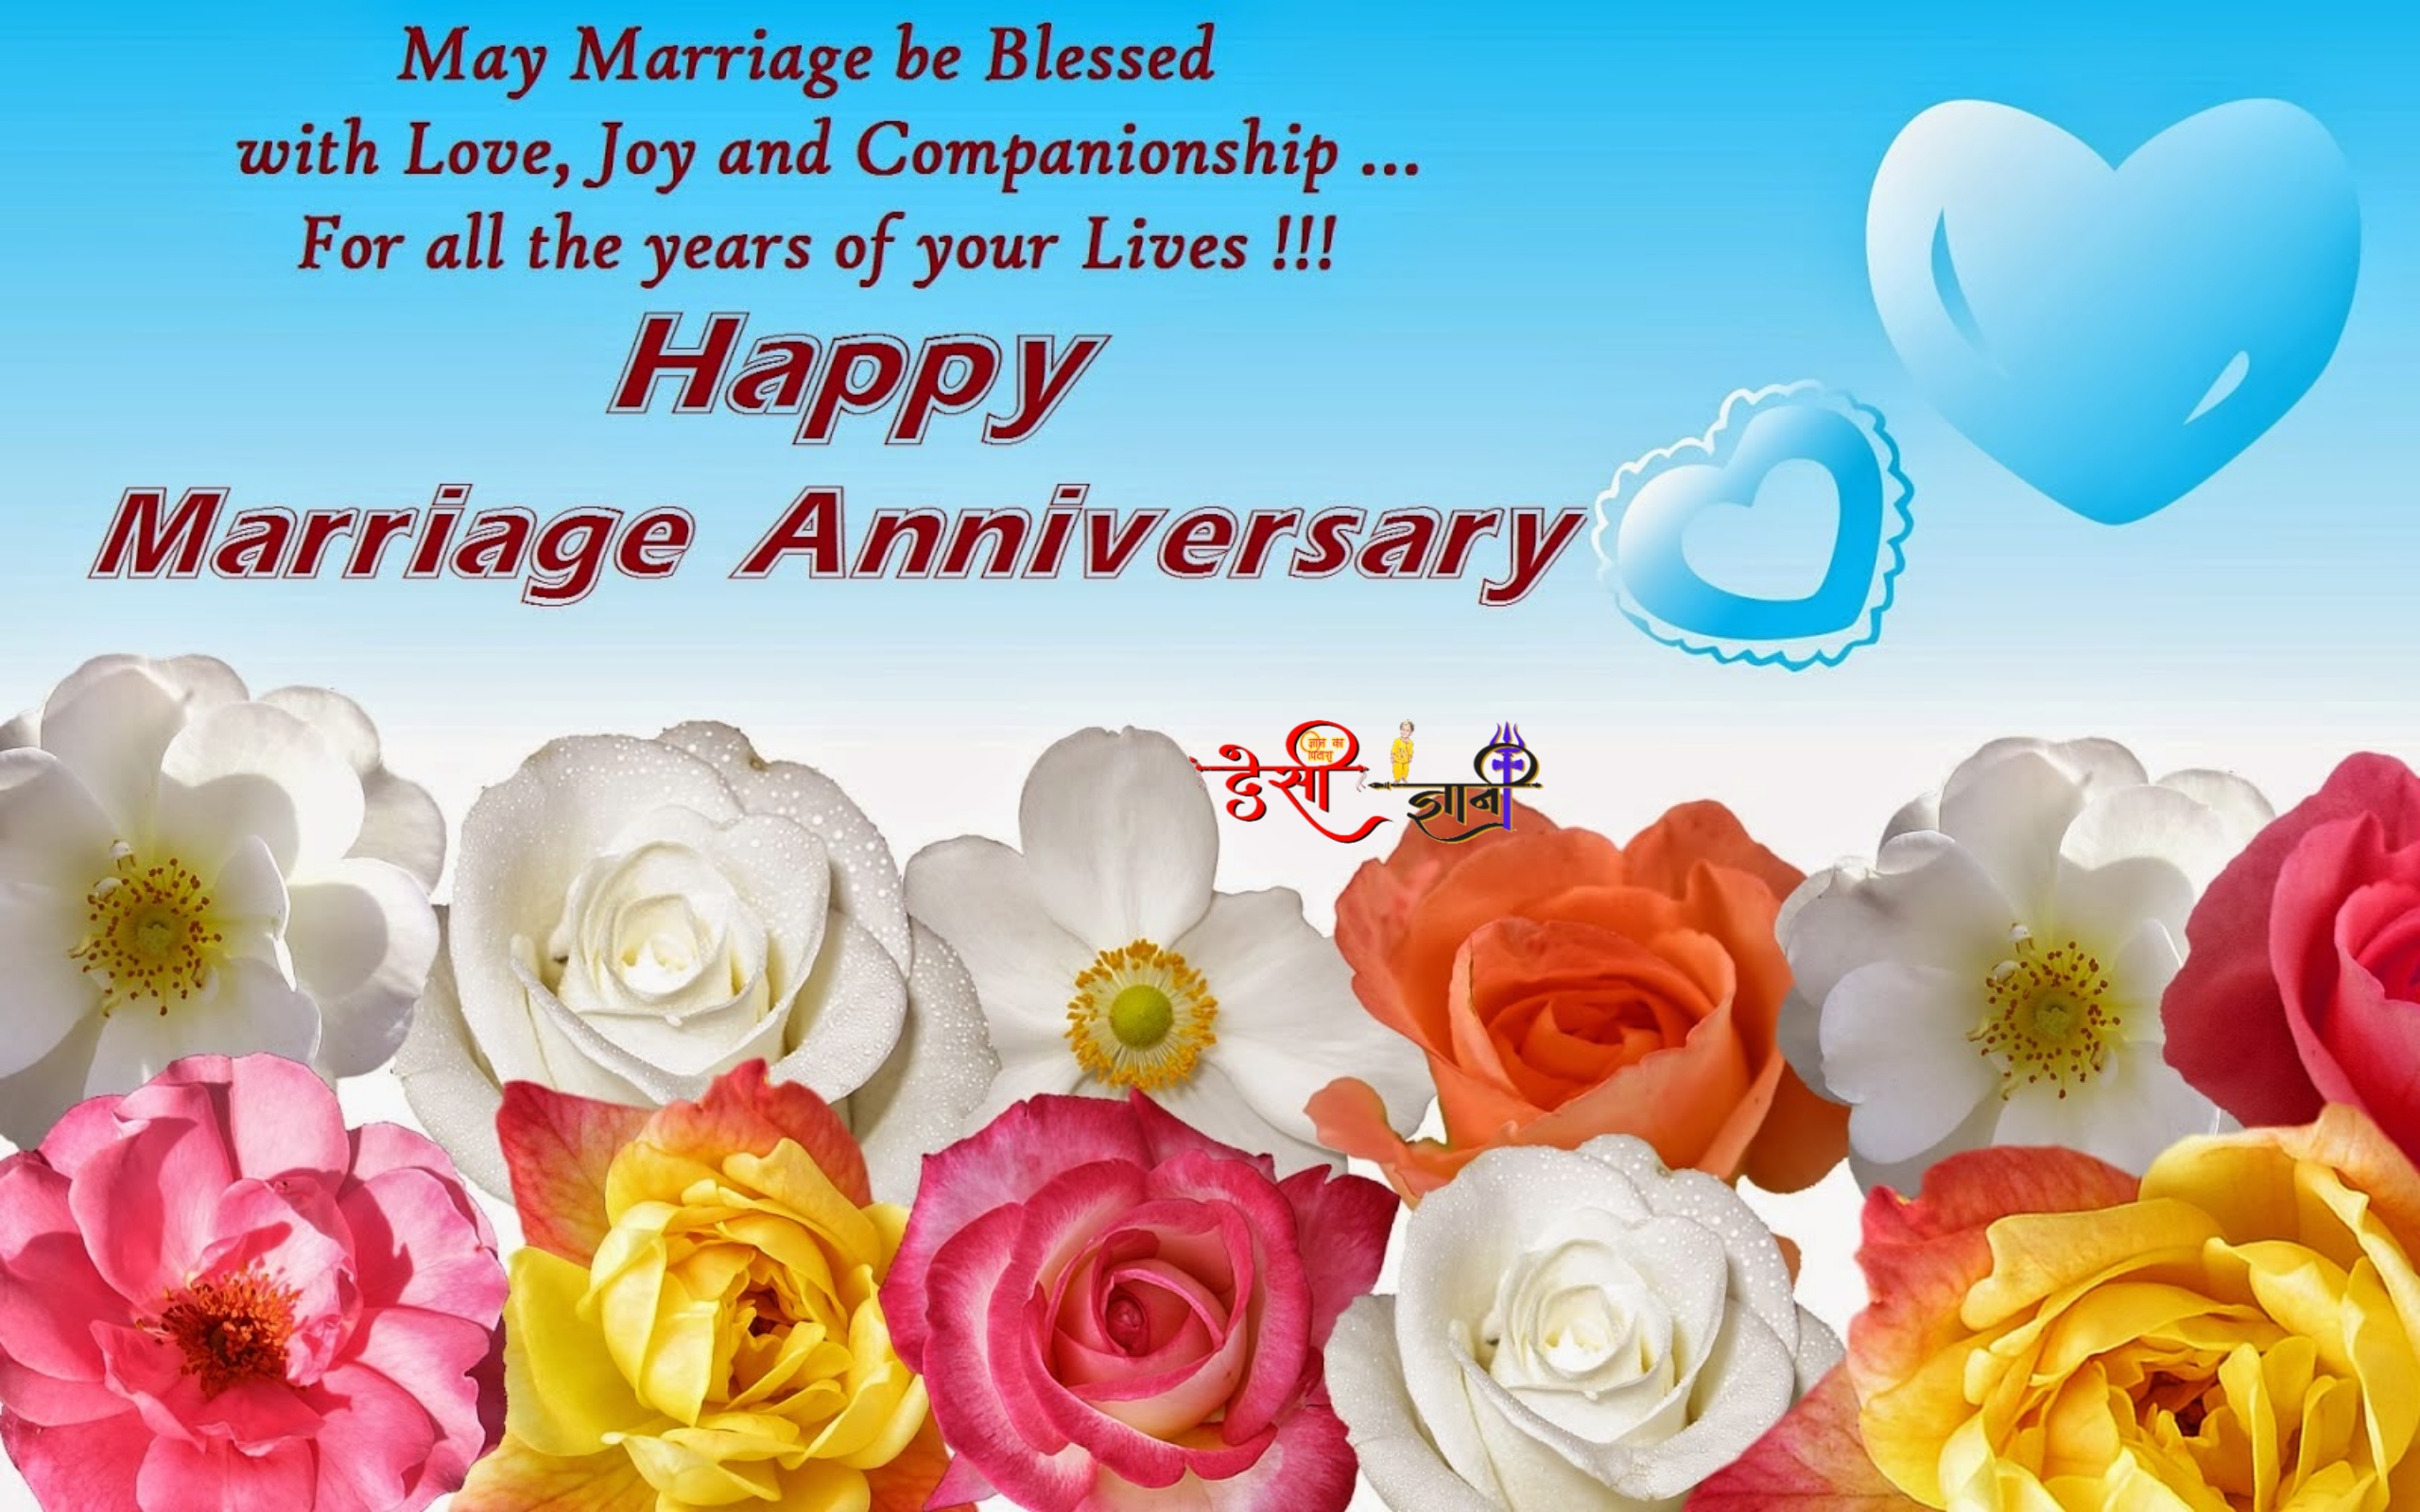 Happy Marriage Anniversary Wishes In English And Hindi